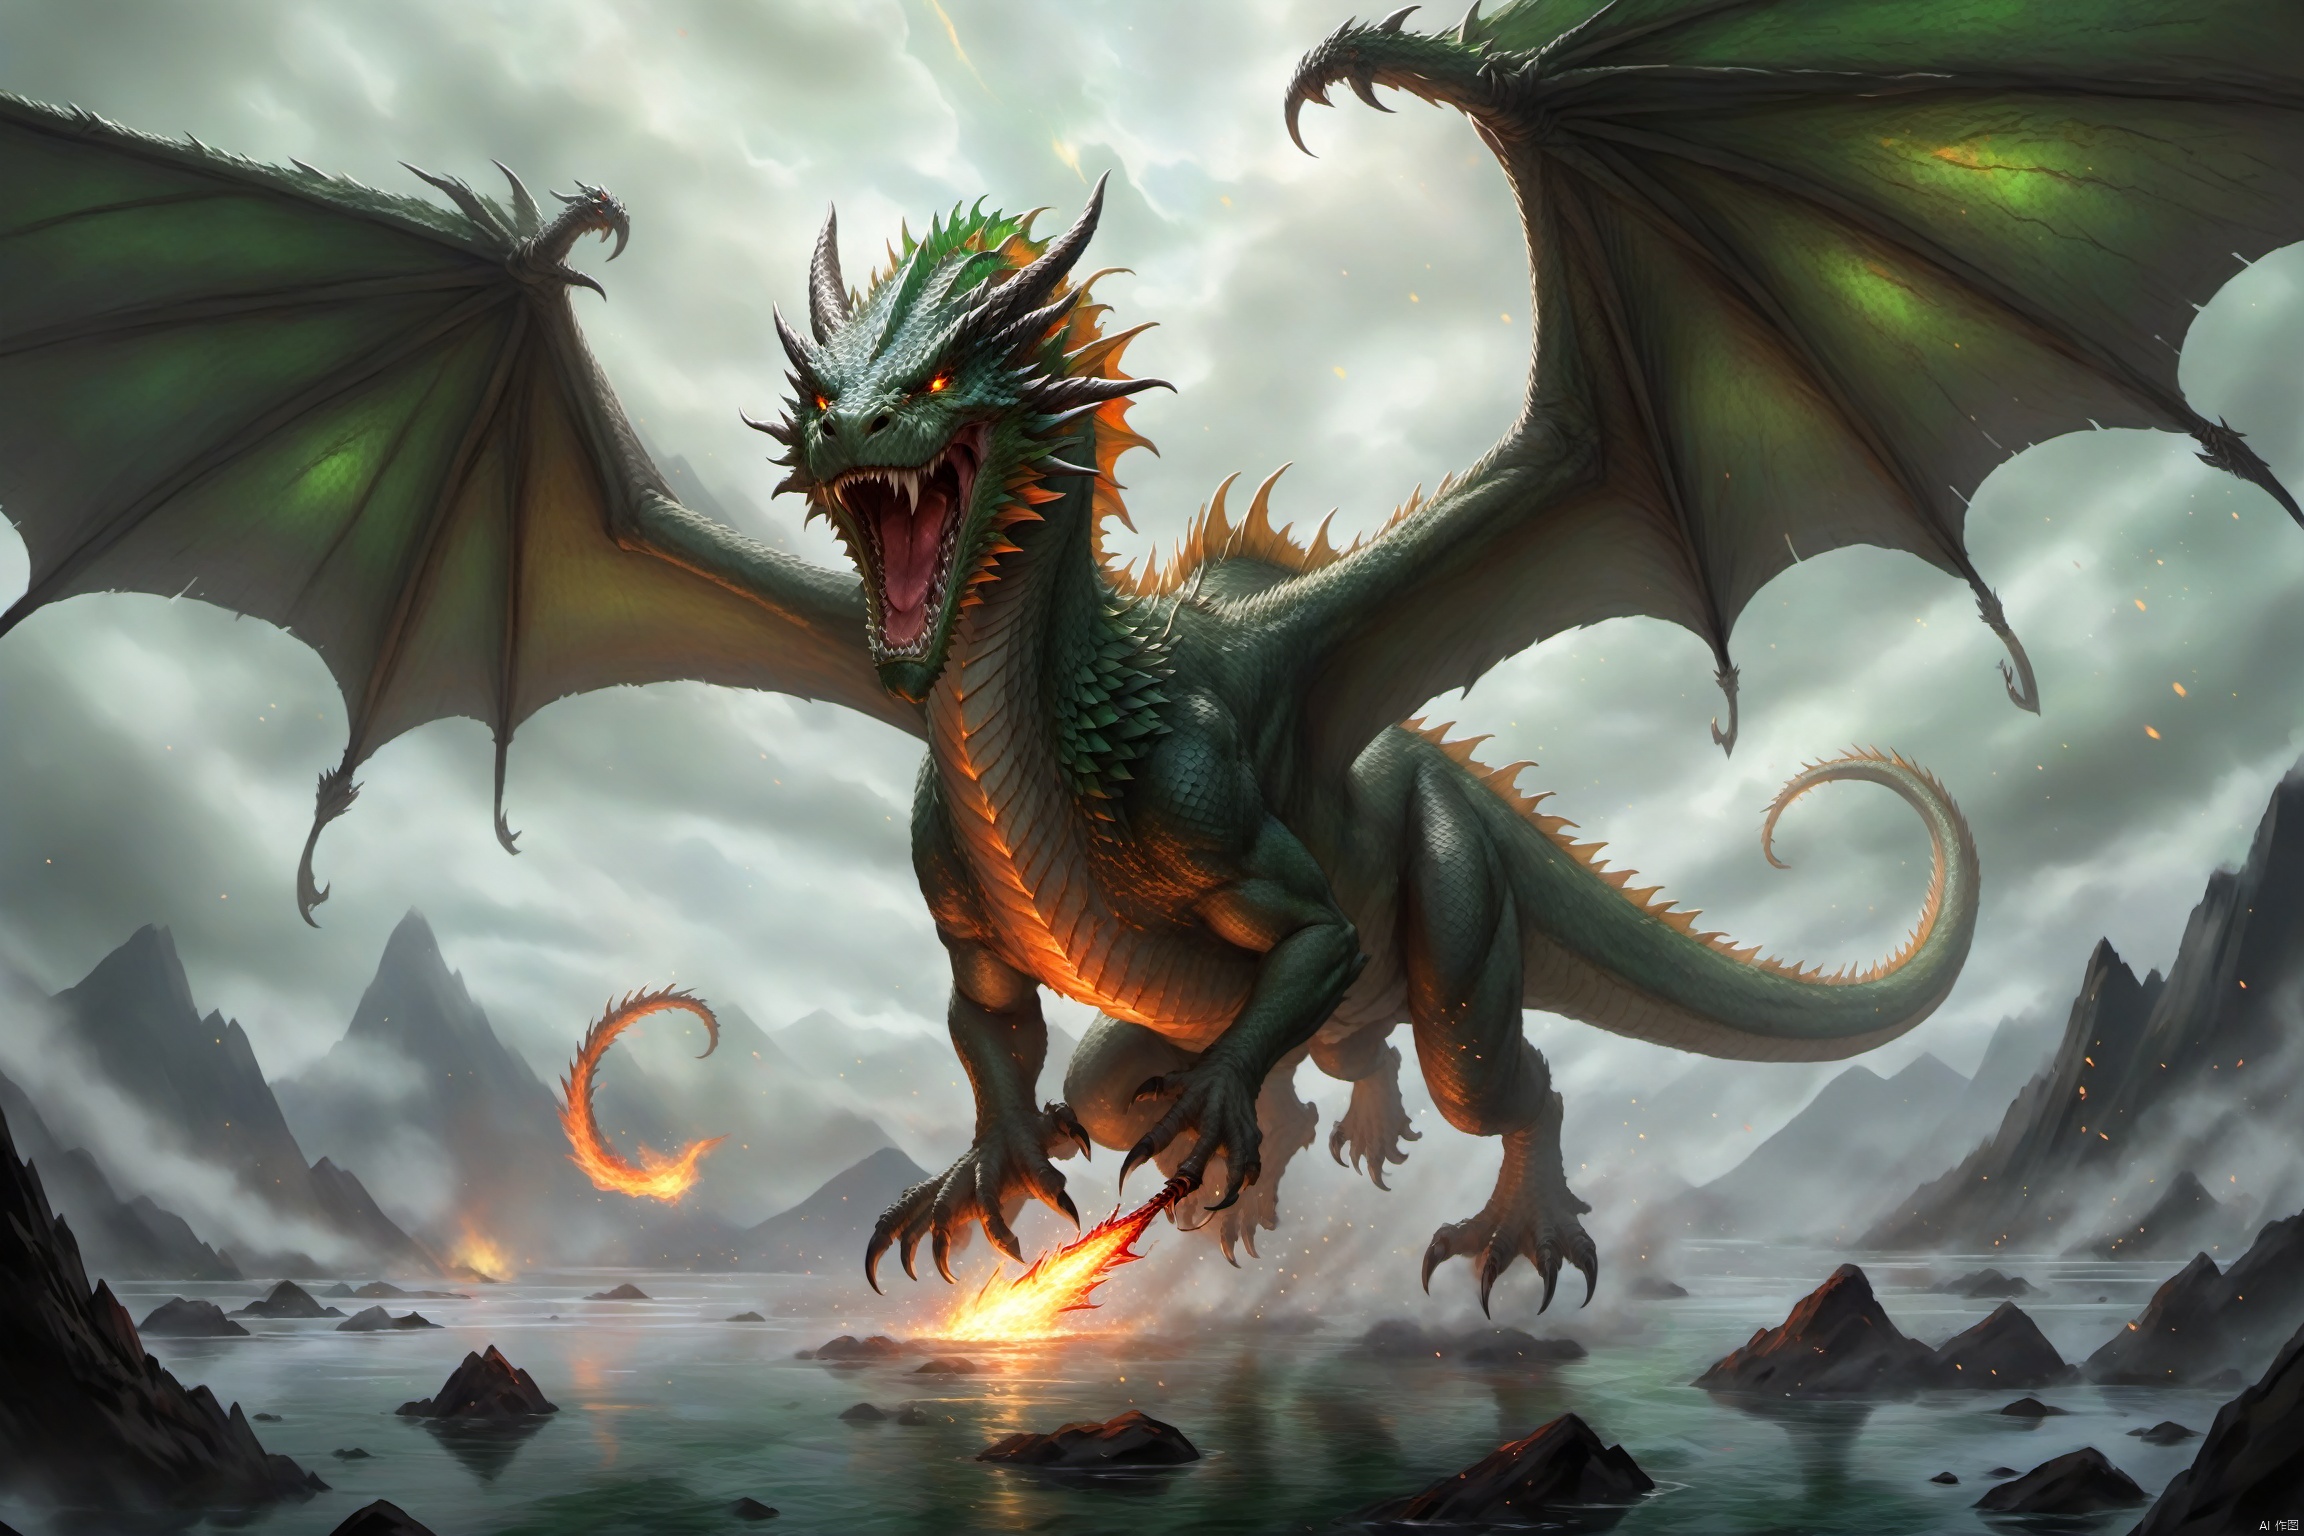 A ferocious wyvern, with scales that shimmer like the surface of a frozen lake, its eyes glowing like the fiery embers of a volcano, soars through the sky with a group of elves clinging to its back. The wyvern’s eyes narrow as it spots a group of orcs approaching, their skin a mottled green, their axes dripping with the blood of their victims. The wyvern’s wings begin to beat a path through the clouds, its breath a stream of searing fire, as the elves nock their arrows and take aim, their bows glowing with an otherworldly light.